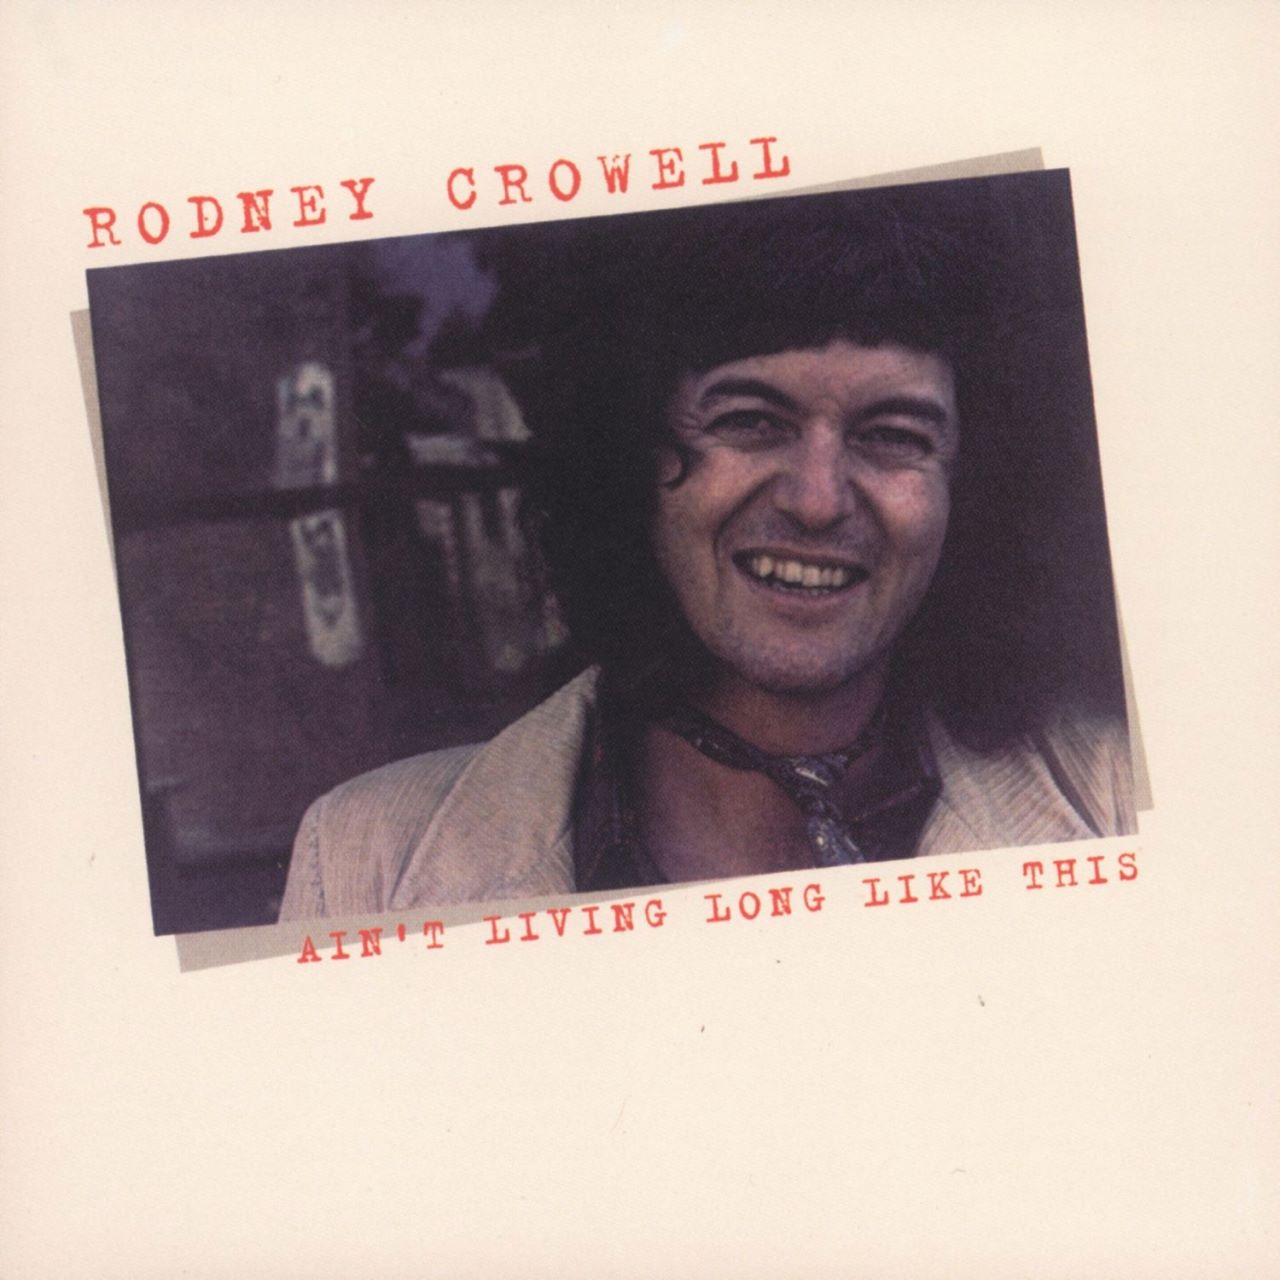 Rodney Crowell - Ain't Living Long Like This cover album